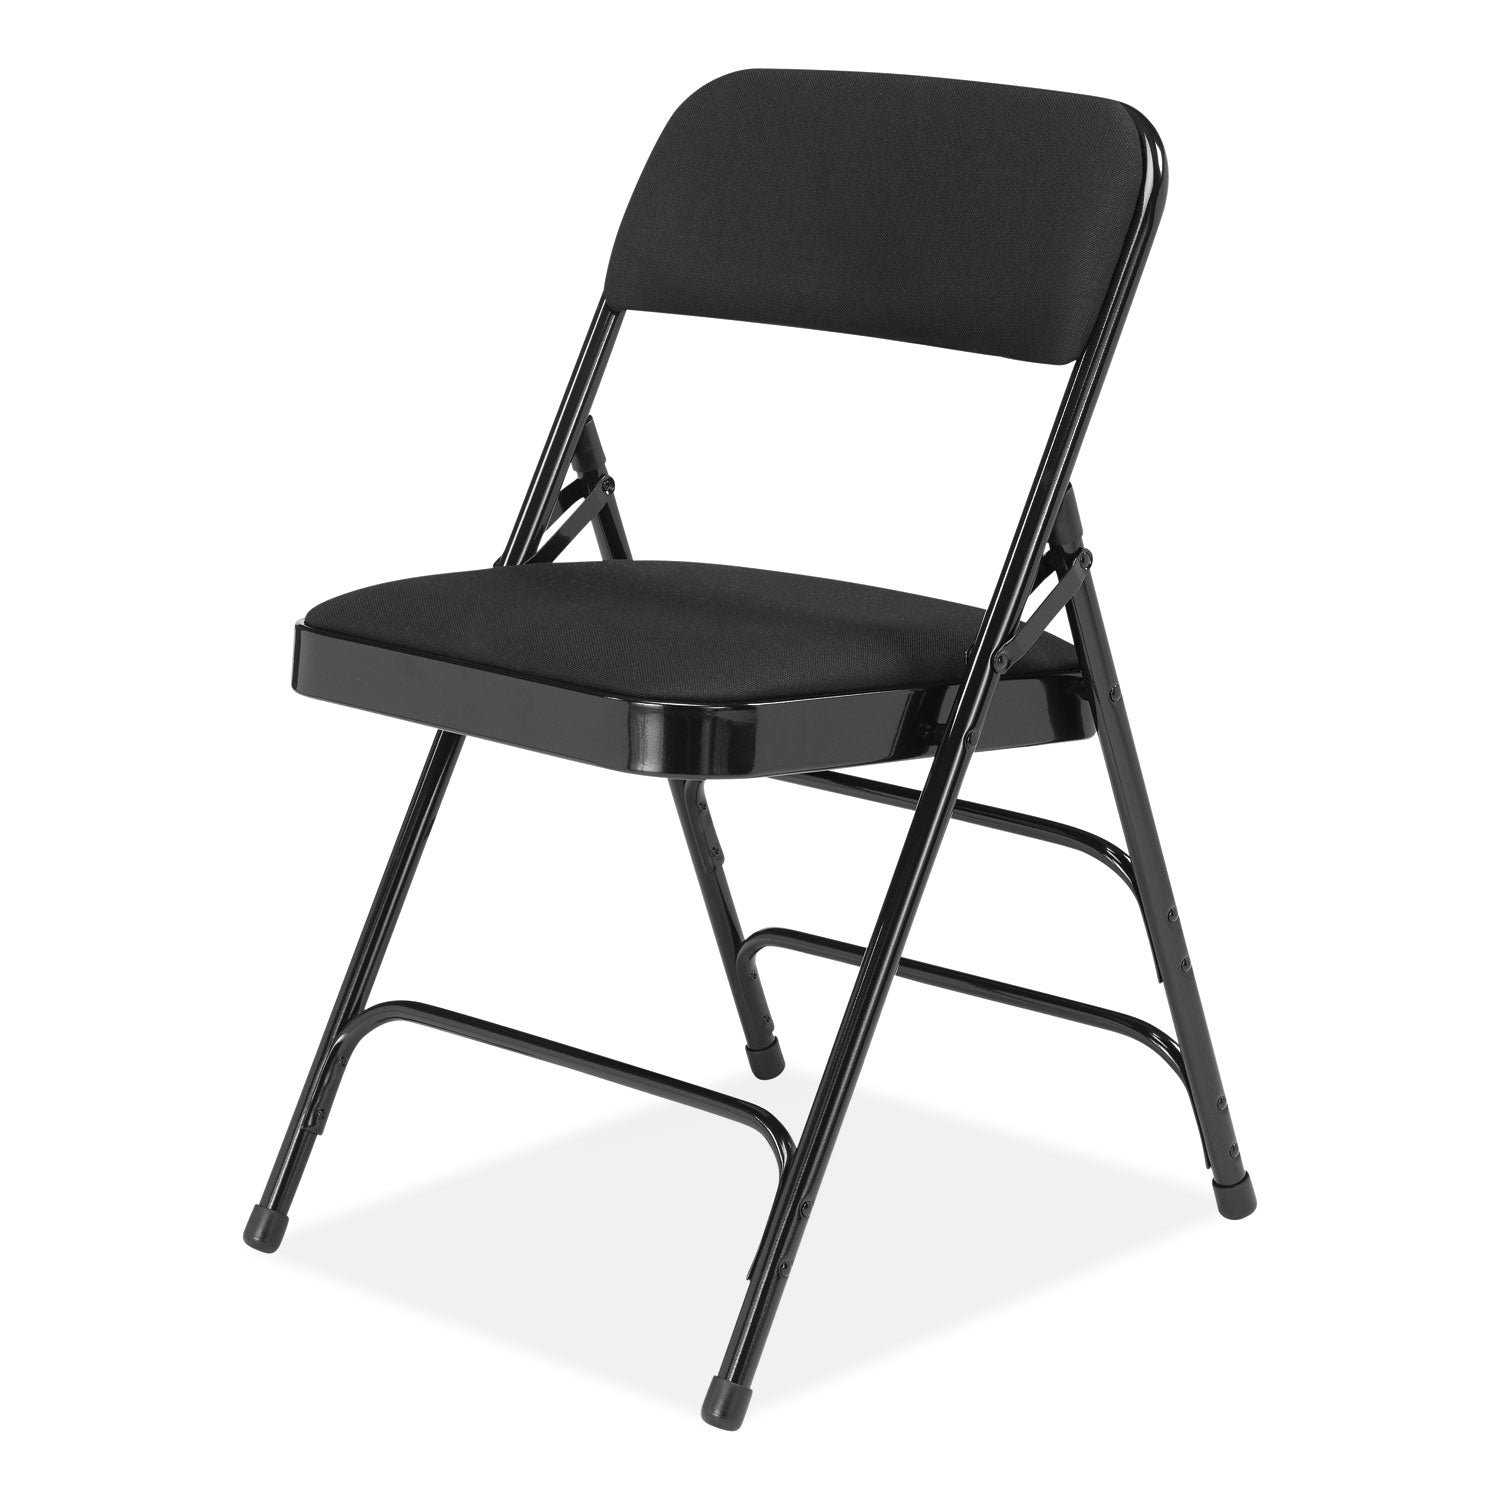 2300-series-fabric-upholstered-triple-brace-premium-folding-chair-supports-500lb-midnight-black-4-ctships-in-1-3-bus-days_nps2310 - 3